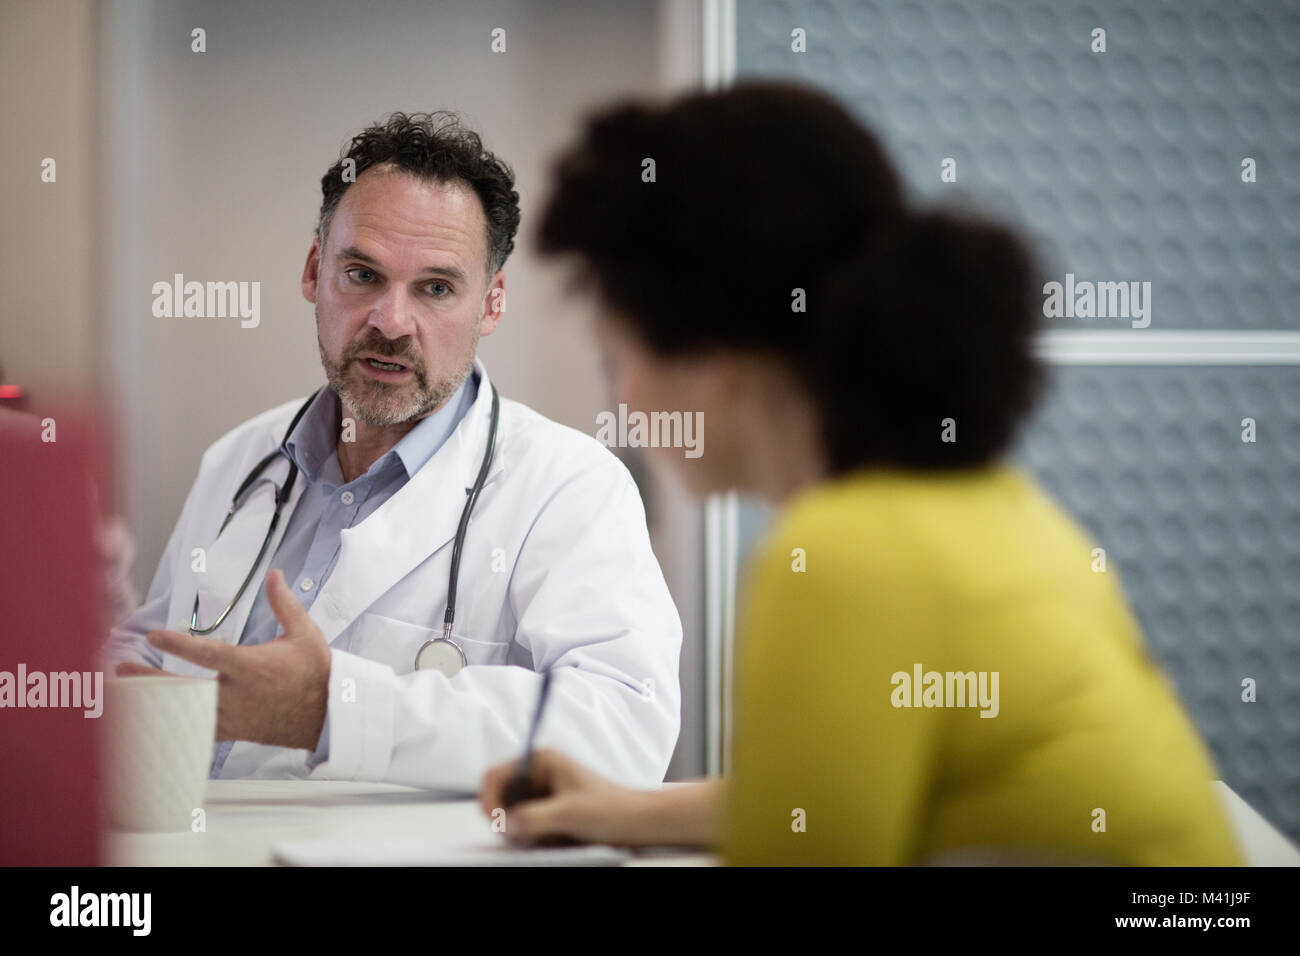 Medical Doctors discussing patient treatment together Stock Photo